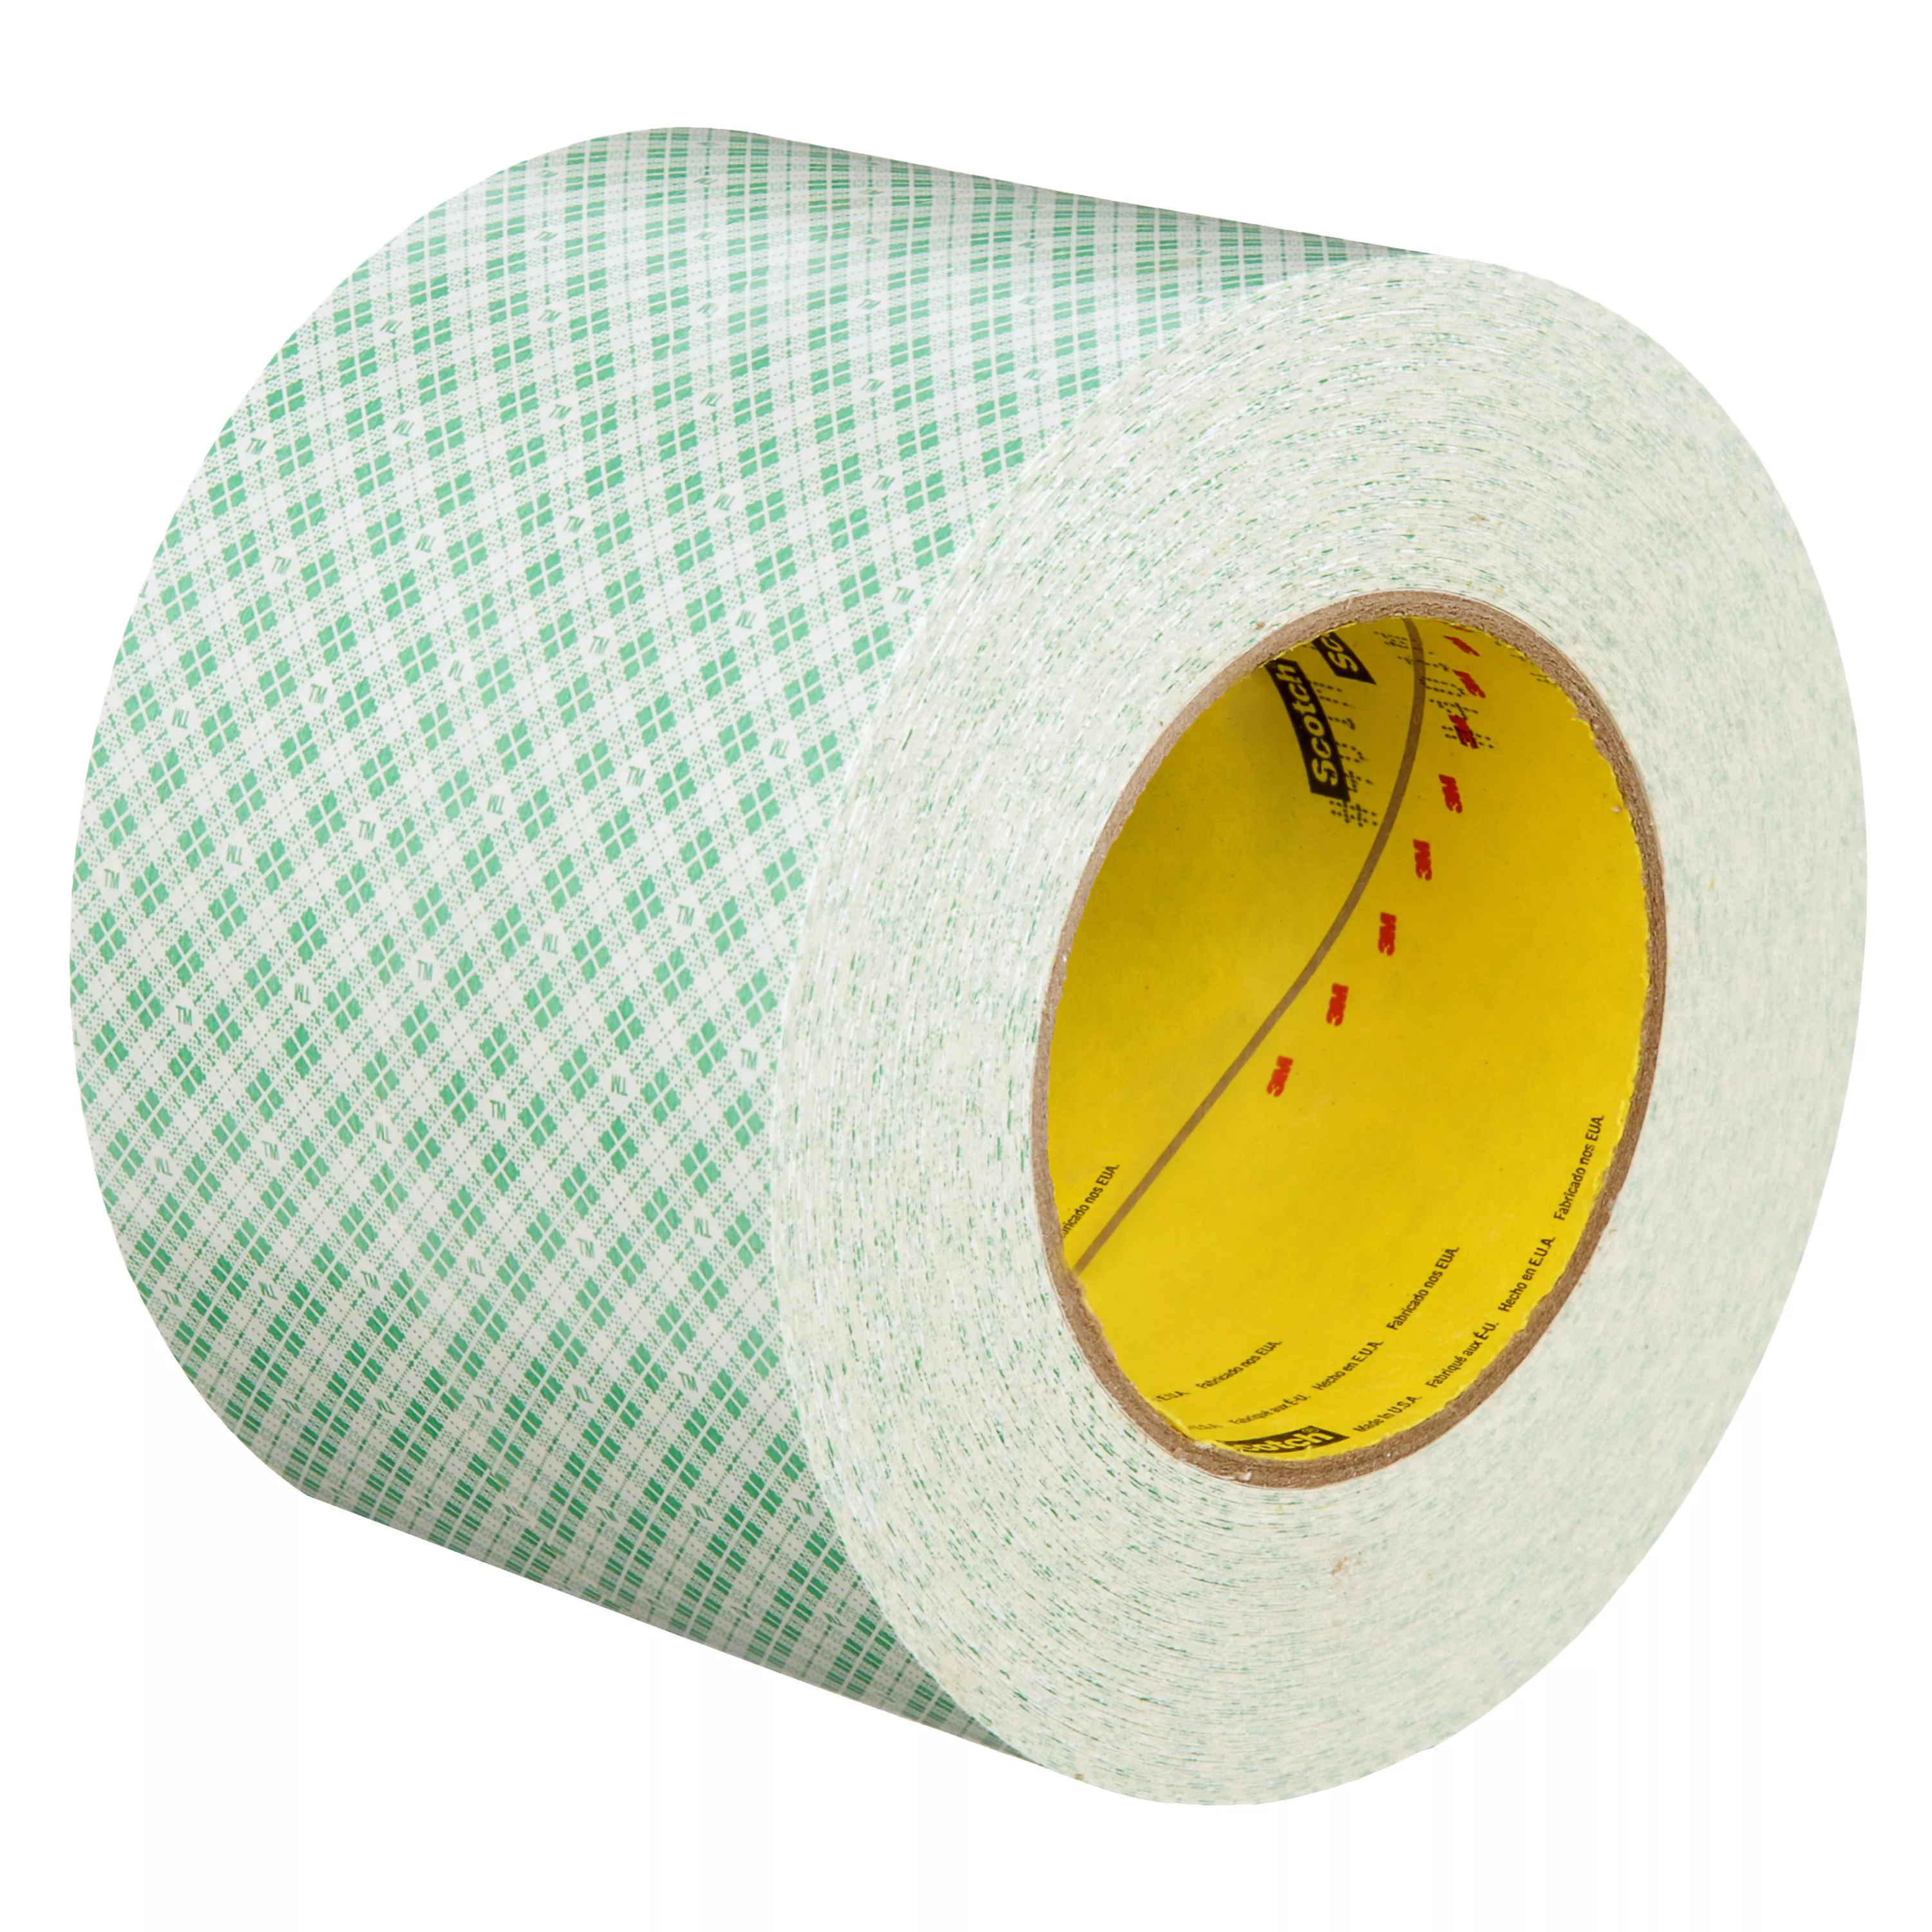 3M™ Double Coated Paper Tape 401M, Natural, 4 in x 36 yd, 9 mil, 8 rolls
per case